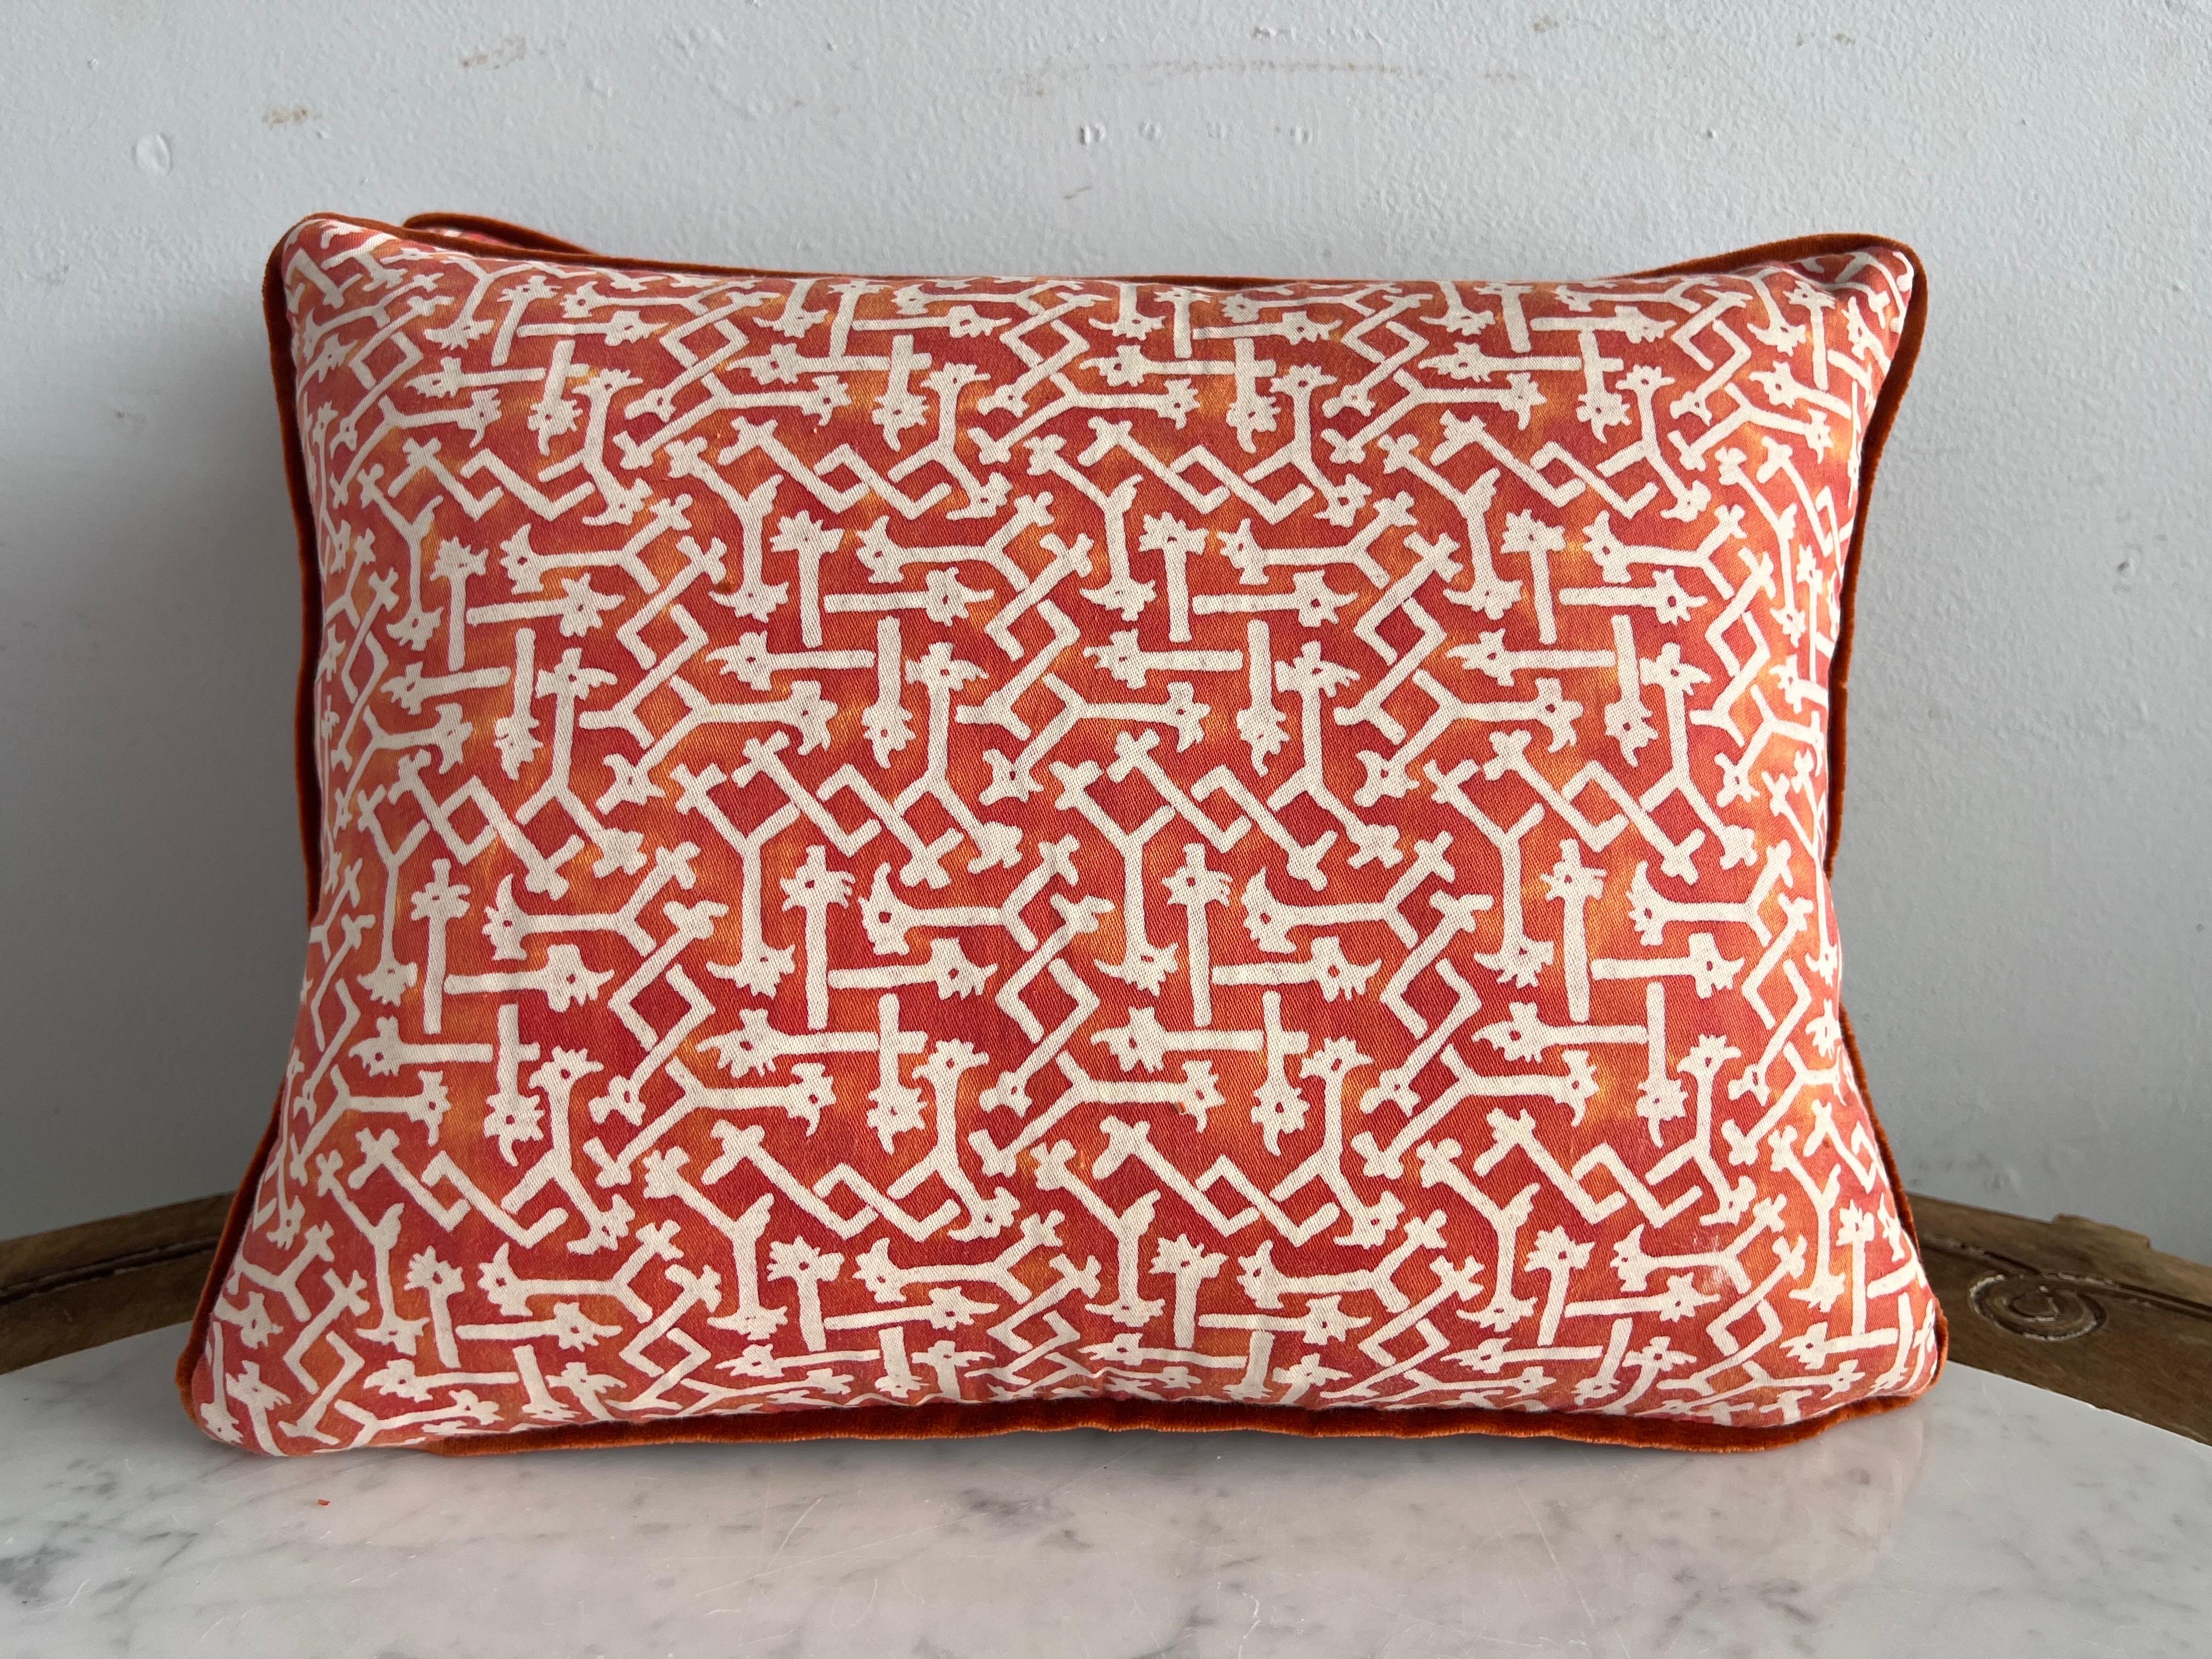 Pair of custom pillows made with vintage coral & white Fortuny cotton fronts and coral velvet backs. Self cord detail. Down inserts, sewn closed.